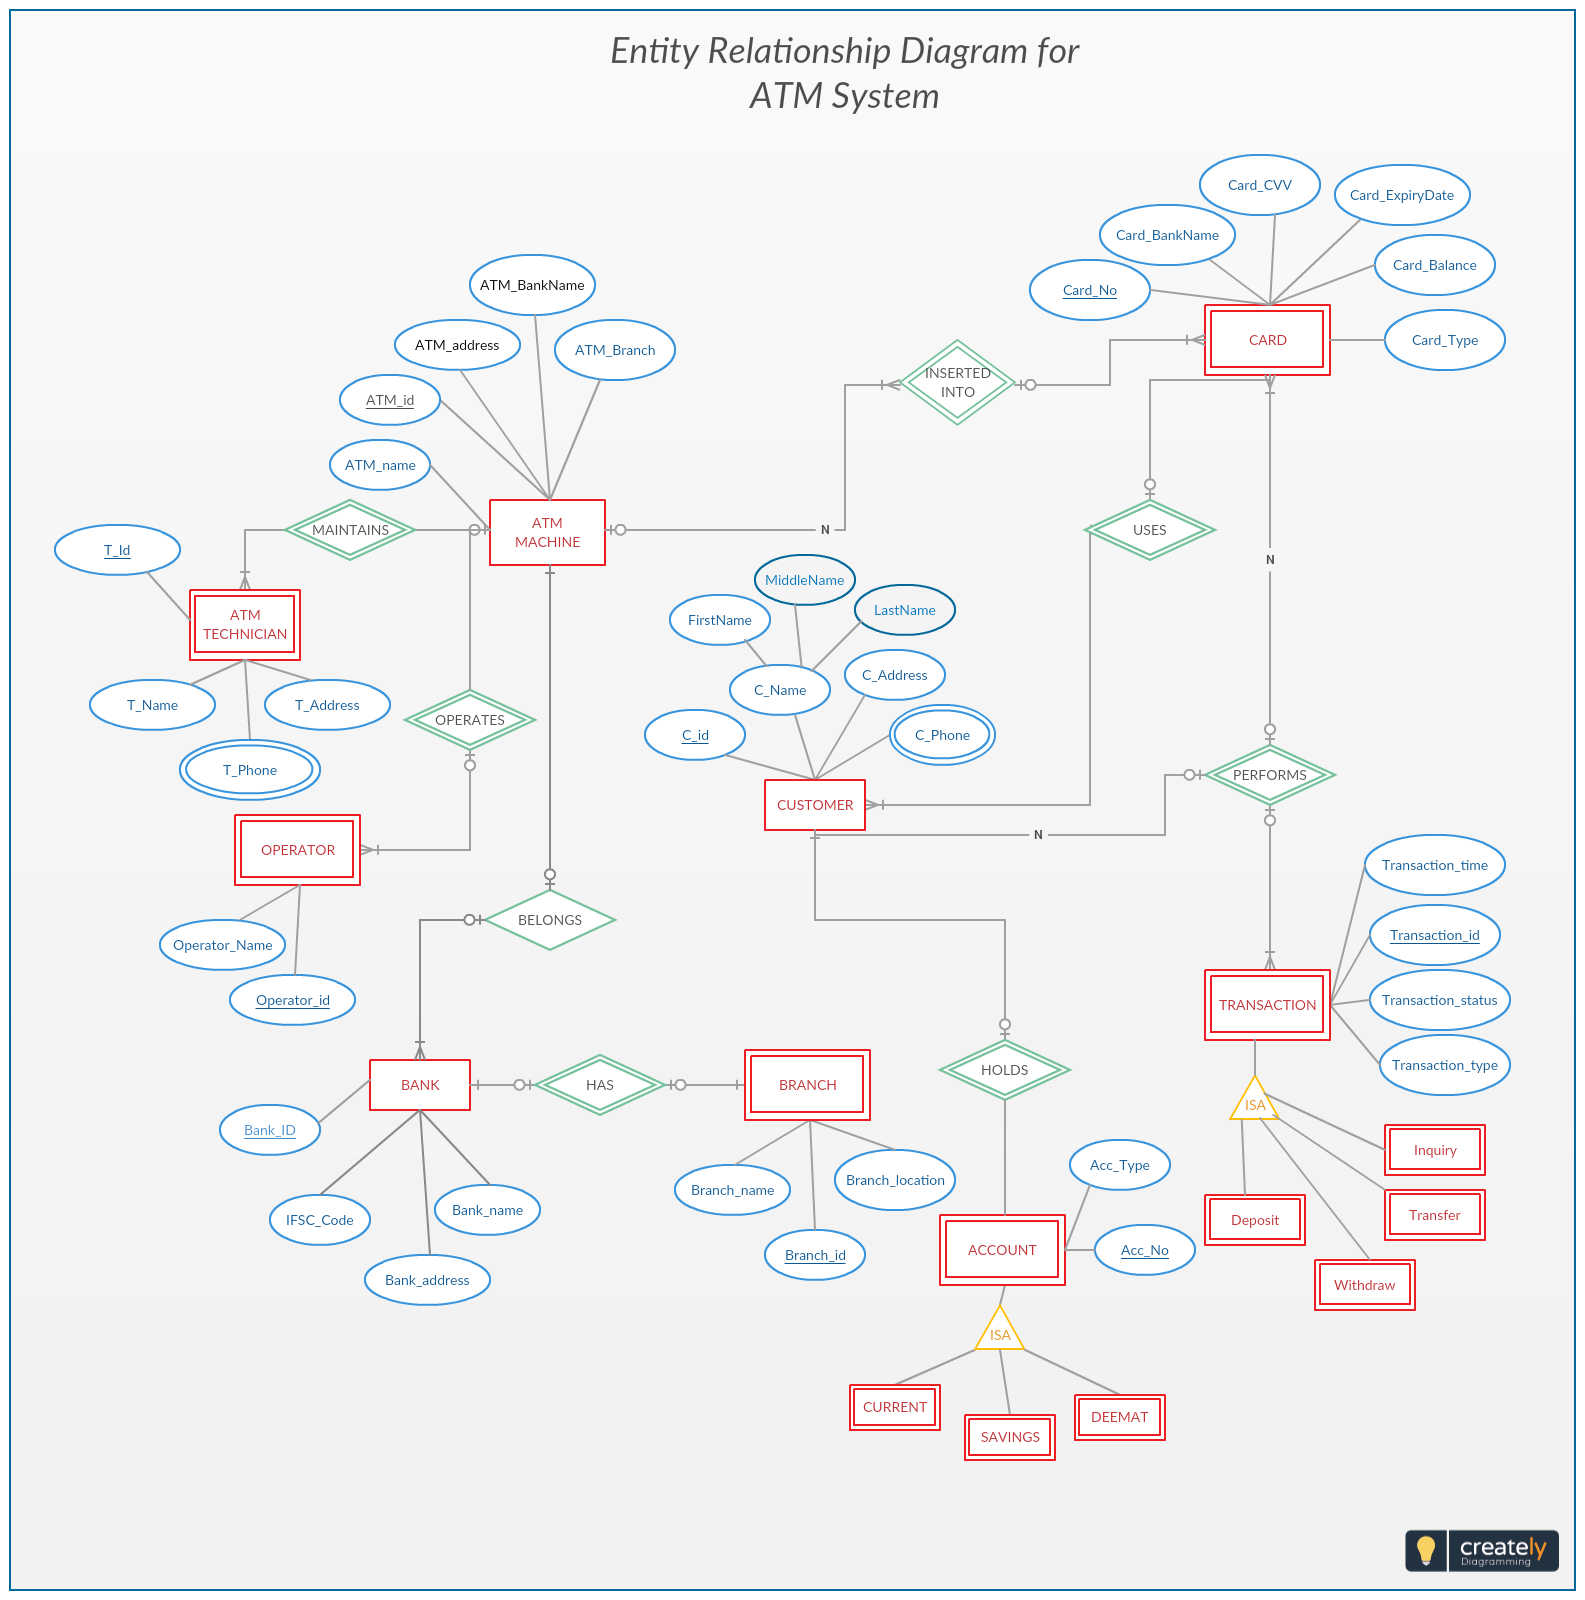 Pin On Entity Relationship Diagram Templates throughout Sample Entity Relationship Diagram